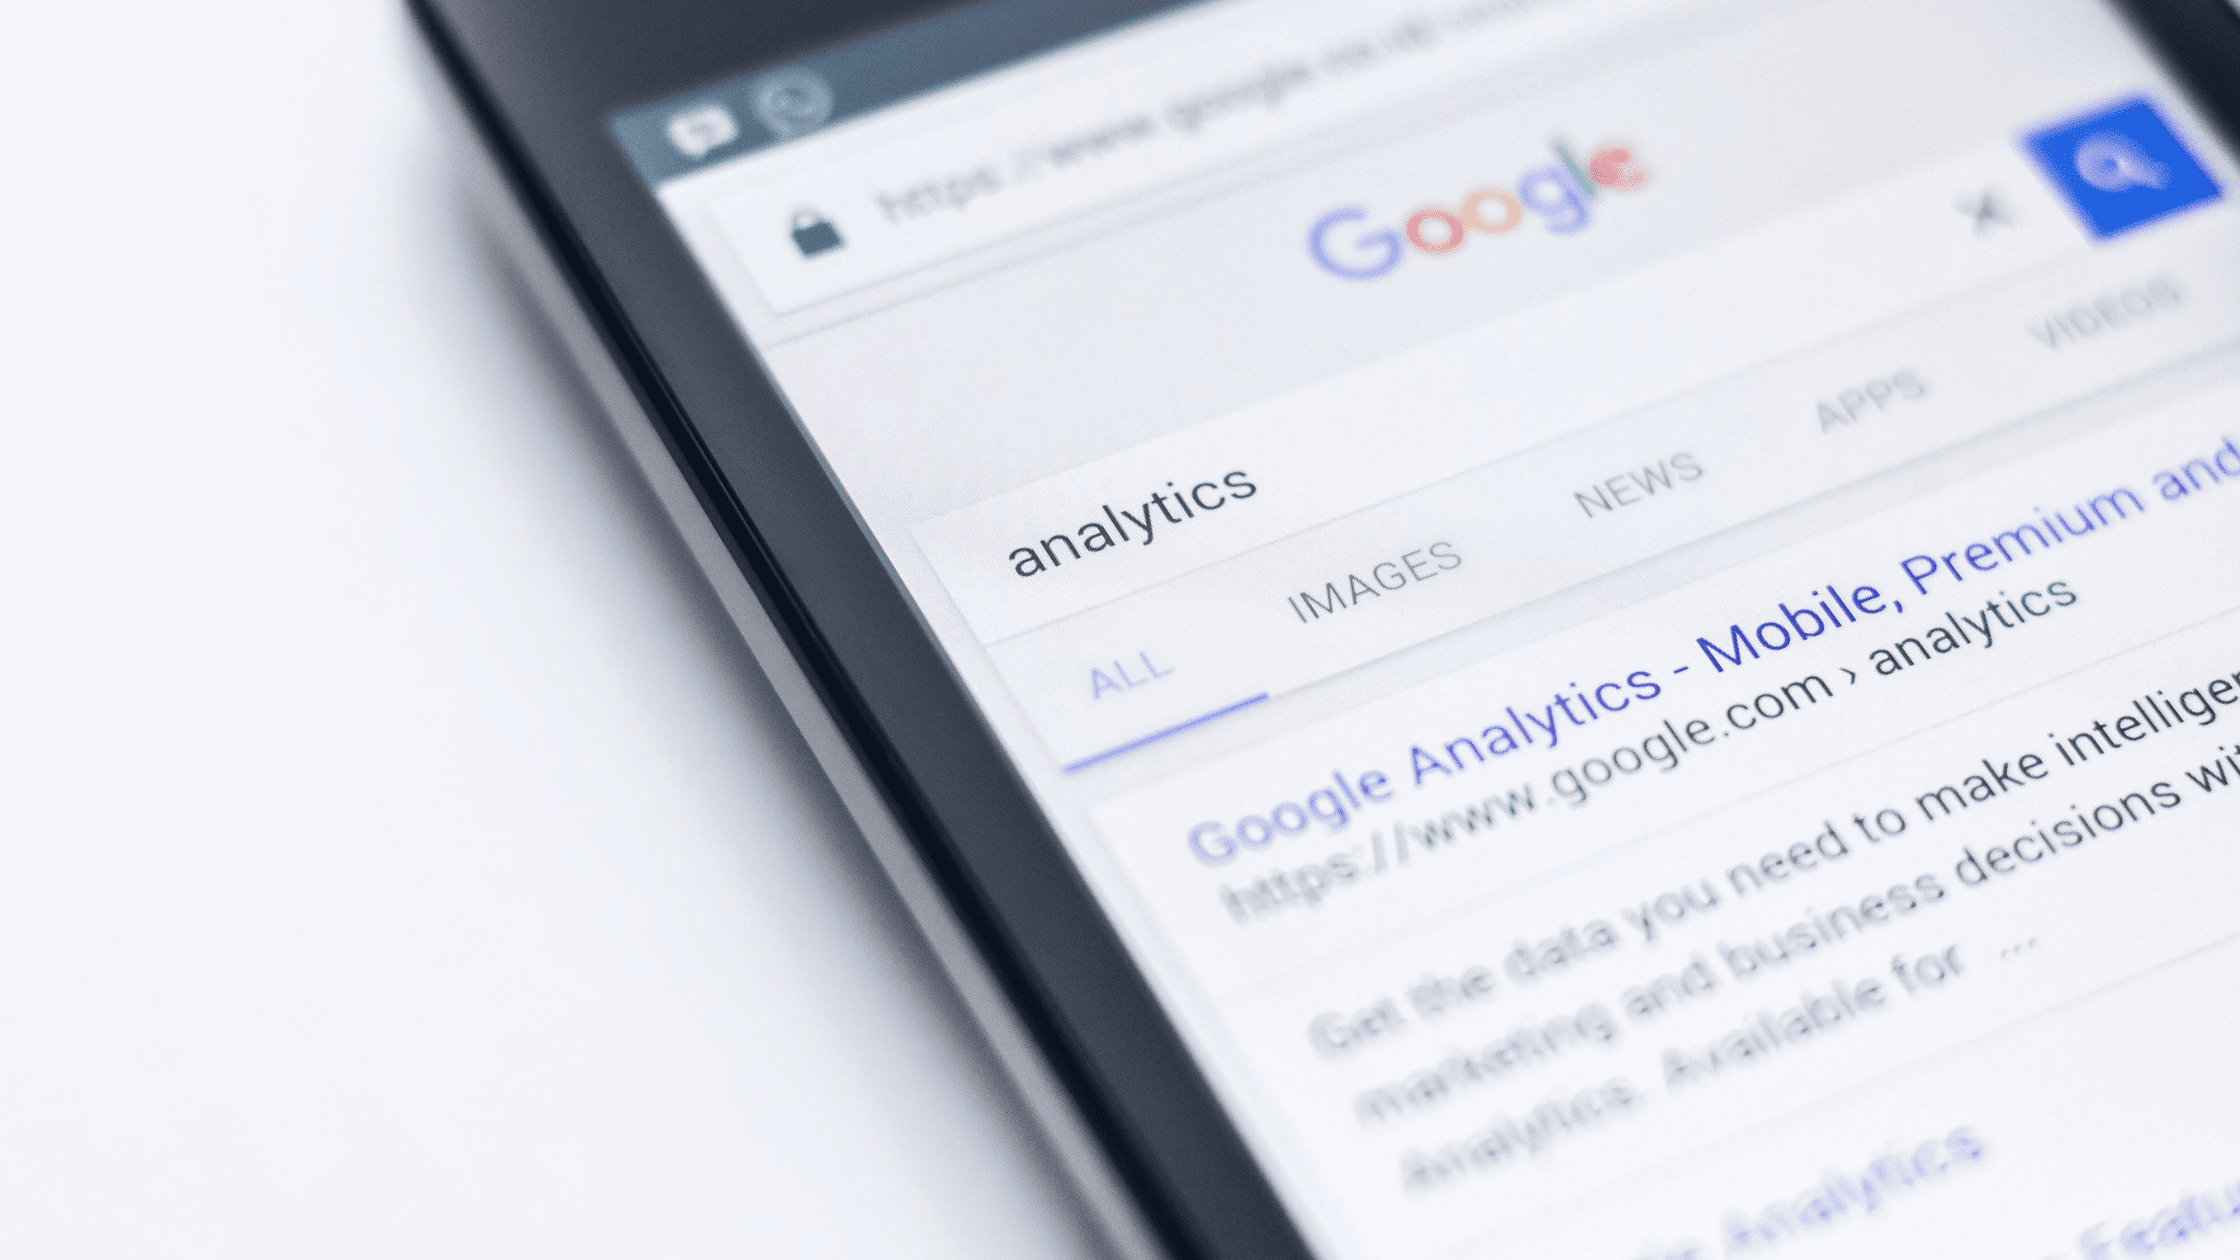 A Beginner’s Guide to Google Analytics 4